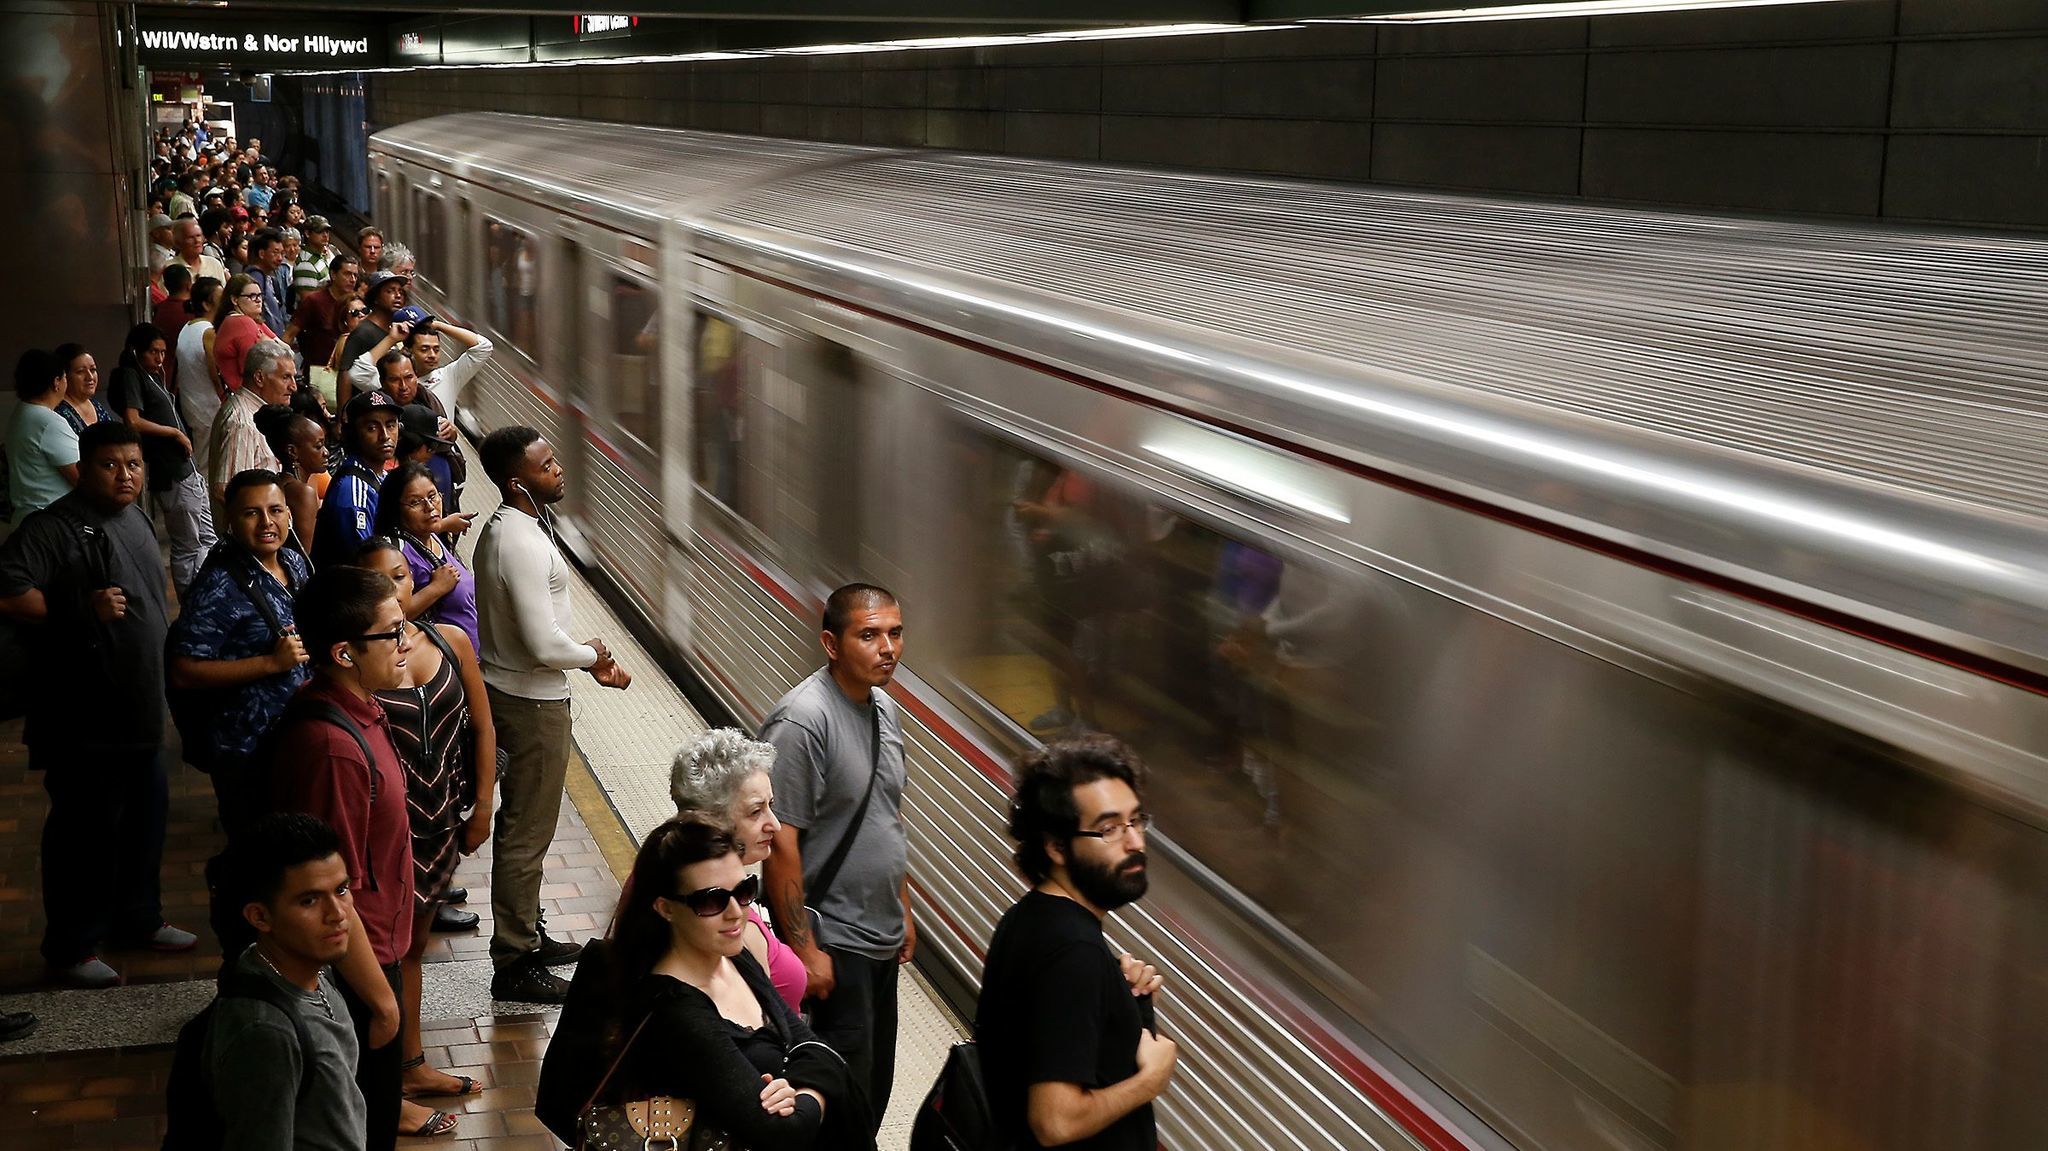 An eastbound train pulls in as commuters wait to board at the 7th Street Metro subway station in 2014.